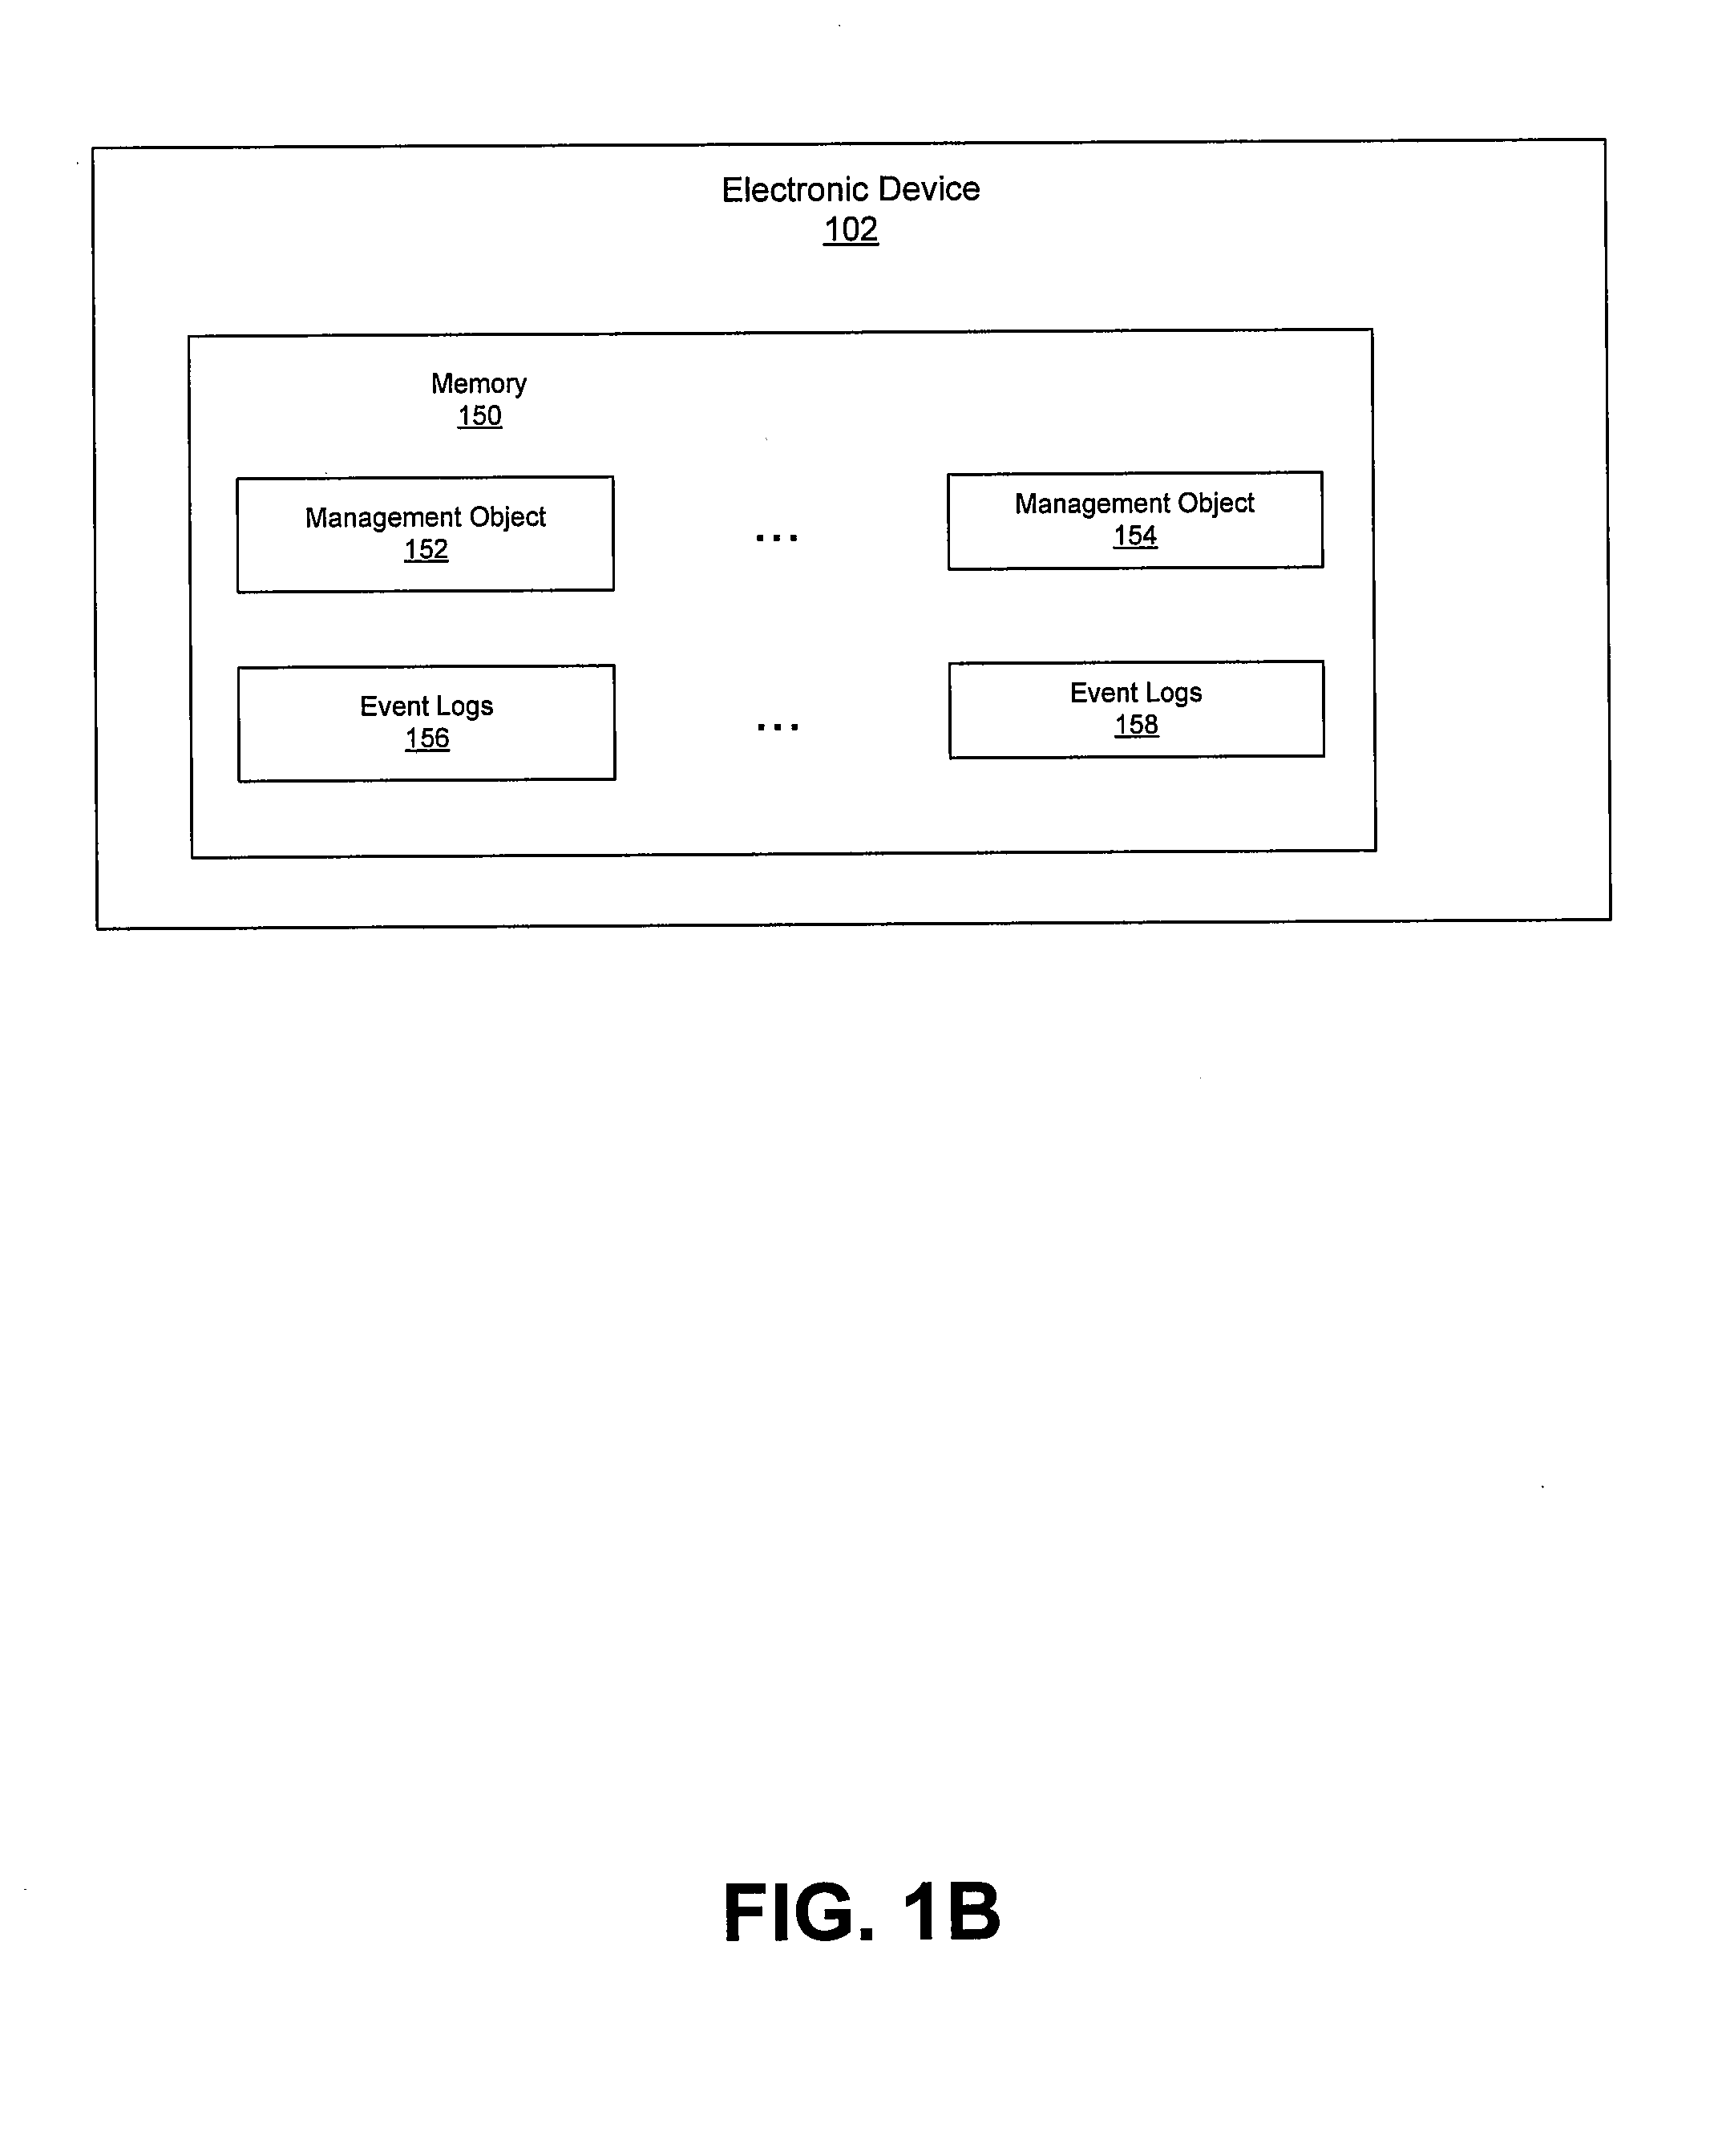 Device and Network Capable of Mobile Device Management